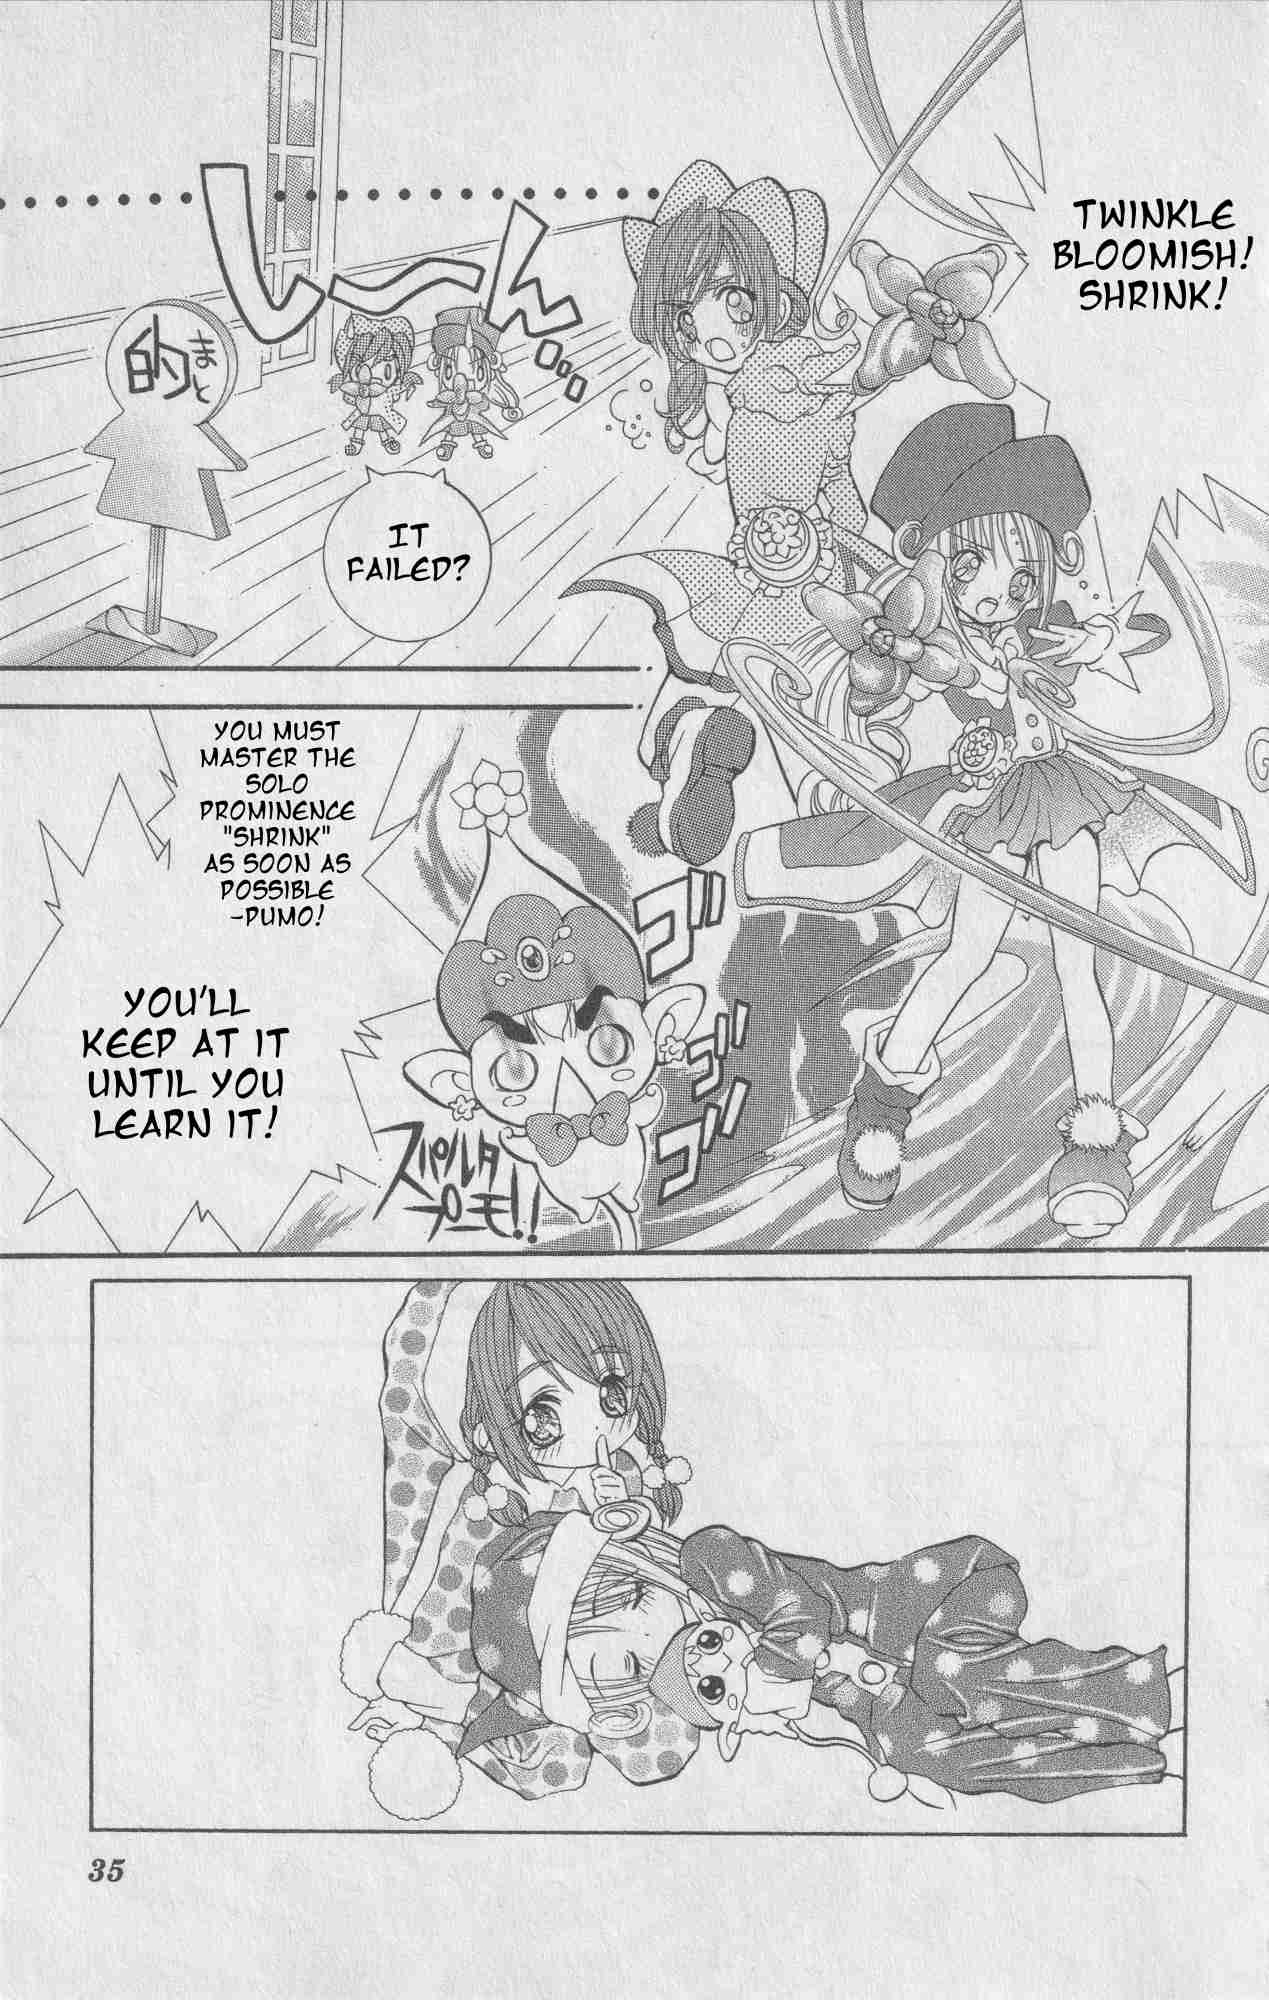 The Twin Princesses of the Wonder Planet: Lovely Kingdom Vol. 2 Ch. 8